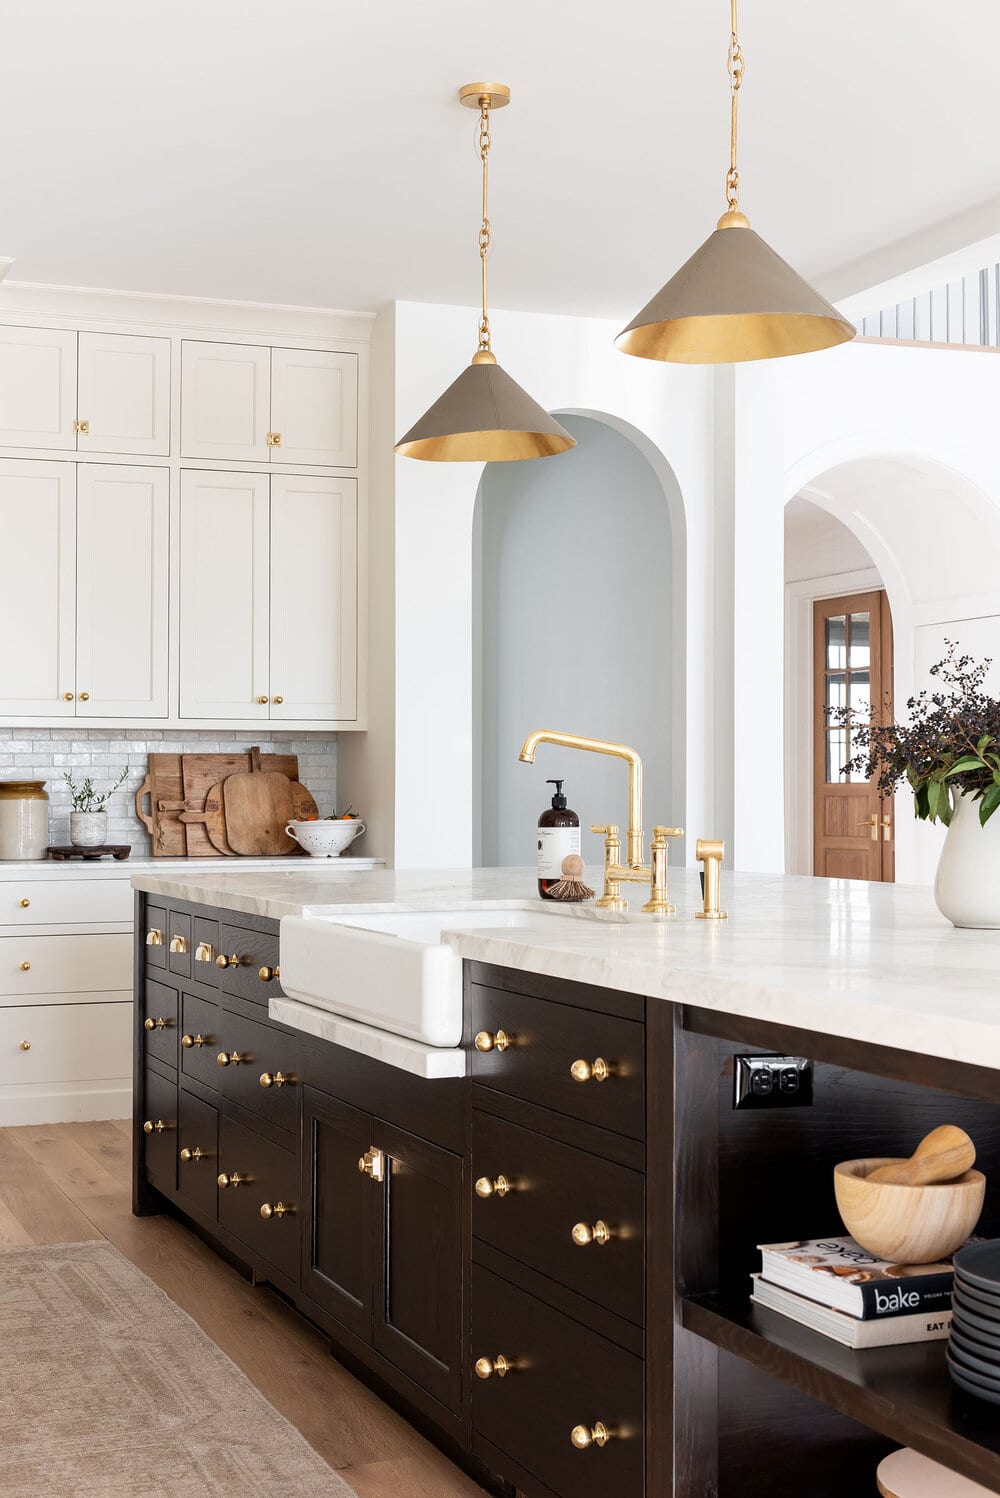 Dark kitchen island with cream color cabinets and gold hardware.